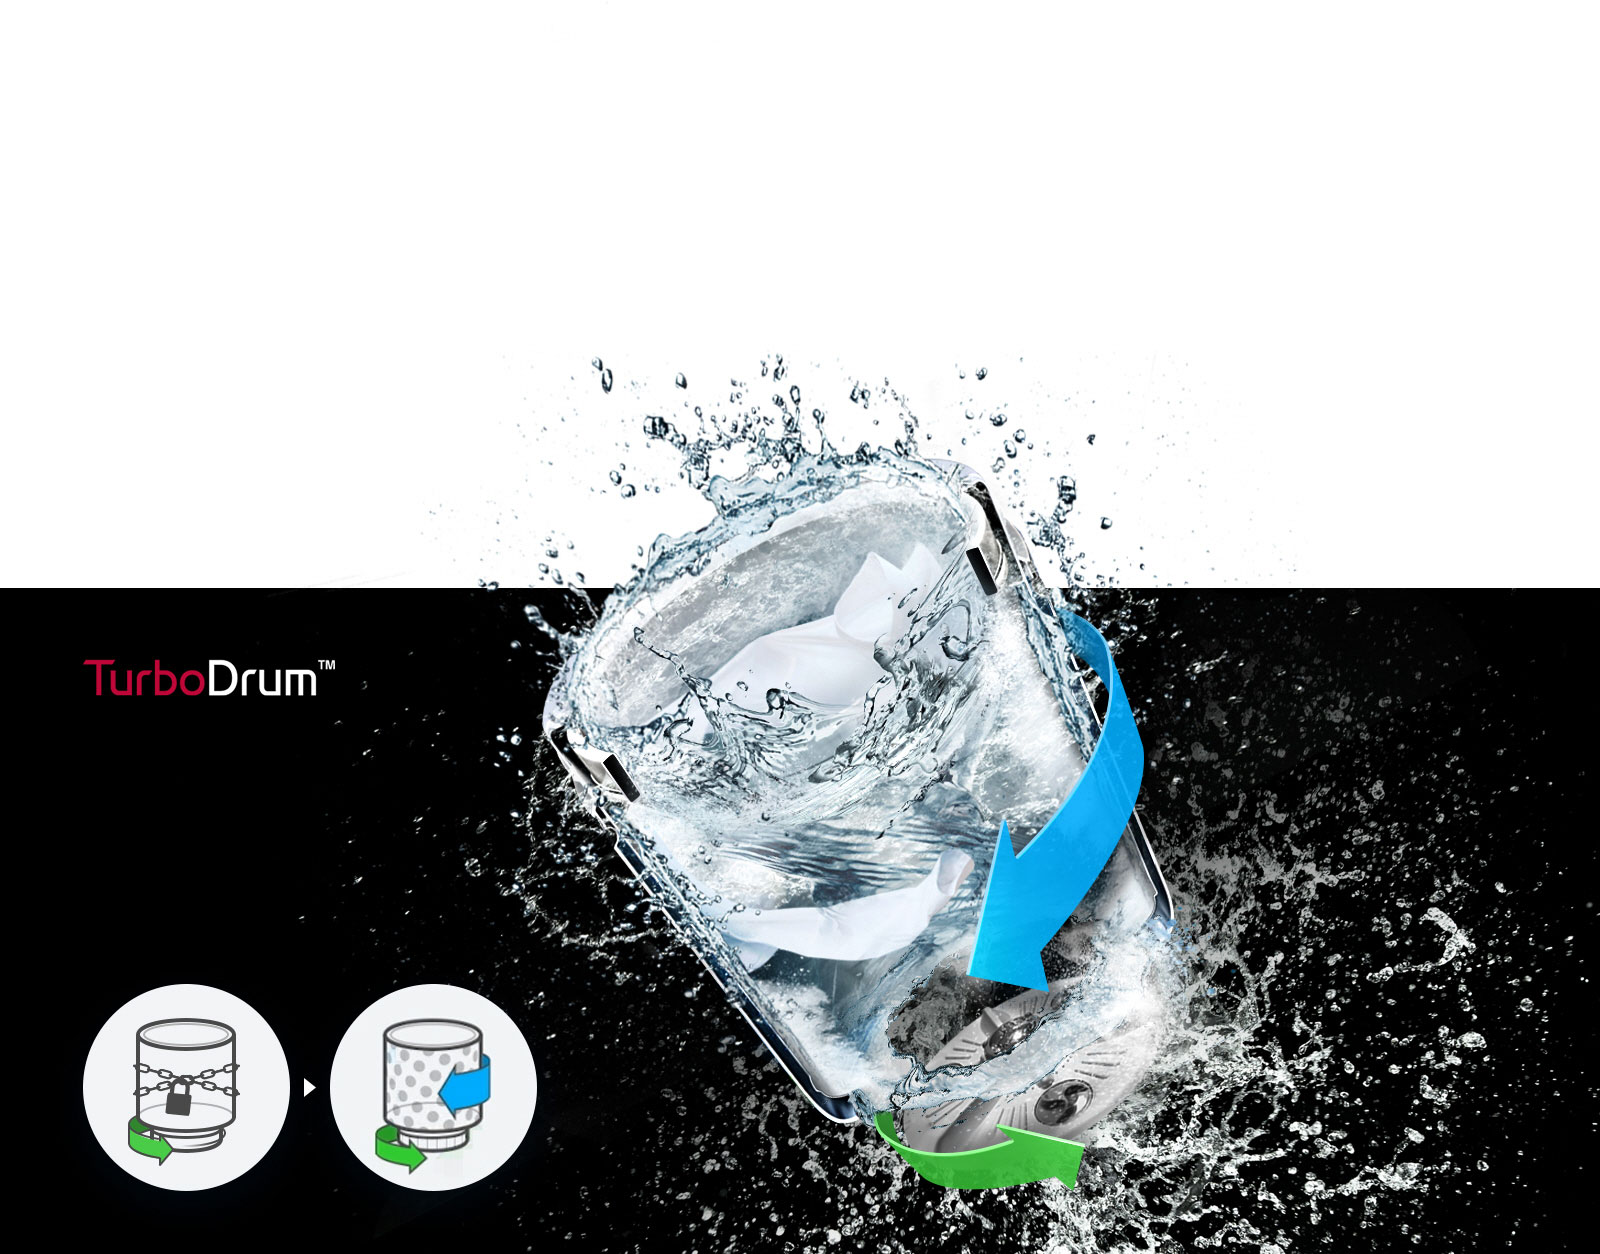 A see through image of water moving around and splashing in the TurboDrum with a green arrow and a blue arrow pointing towards each other show how the water is moved to provide a powerful wash. Two icons are on the left bottom with one featuring one green arrow to show how the drum can rotate in the same direction. The other icon is moving and has one green arrow going one direction and two blue arrows going the other direction to show how the tub and pulsator can rotate independently.